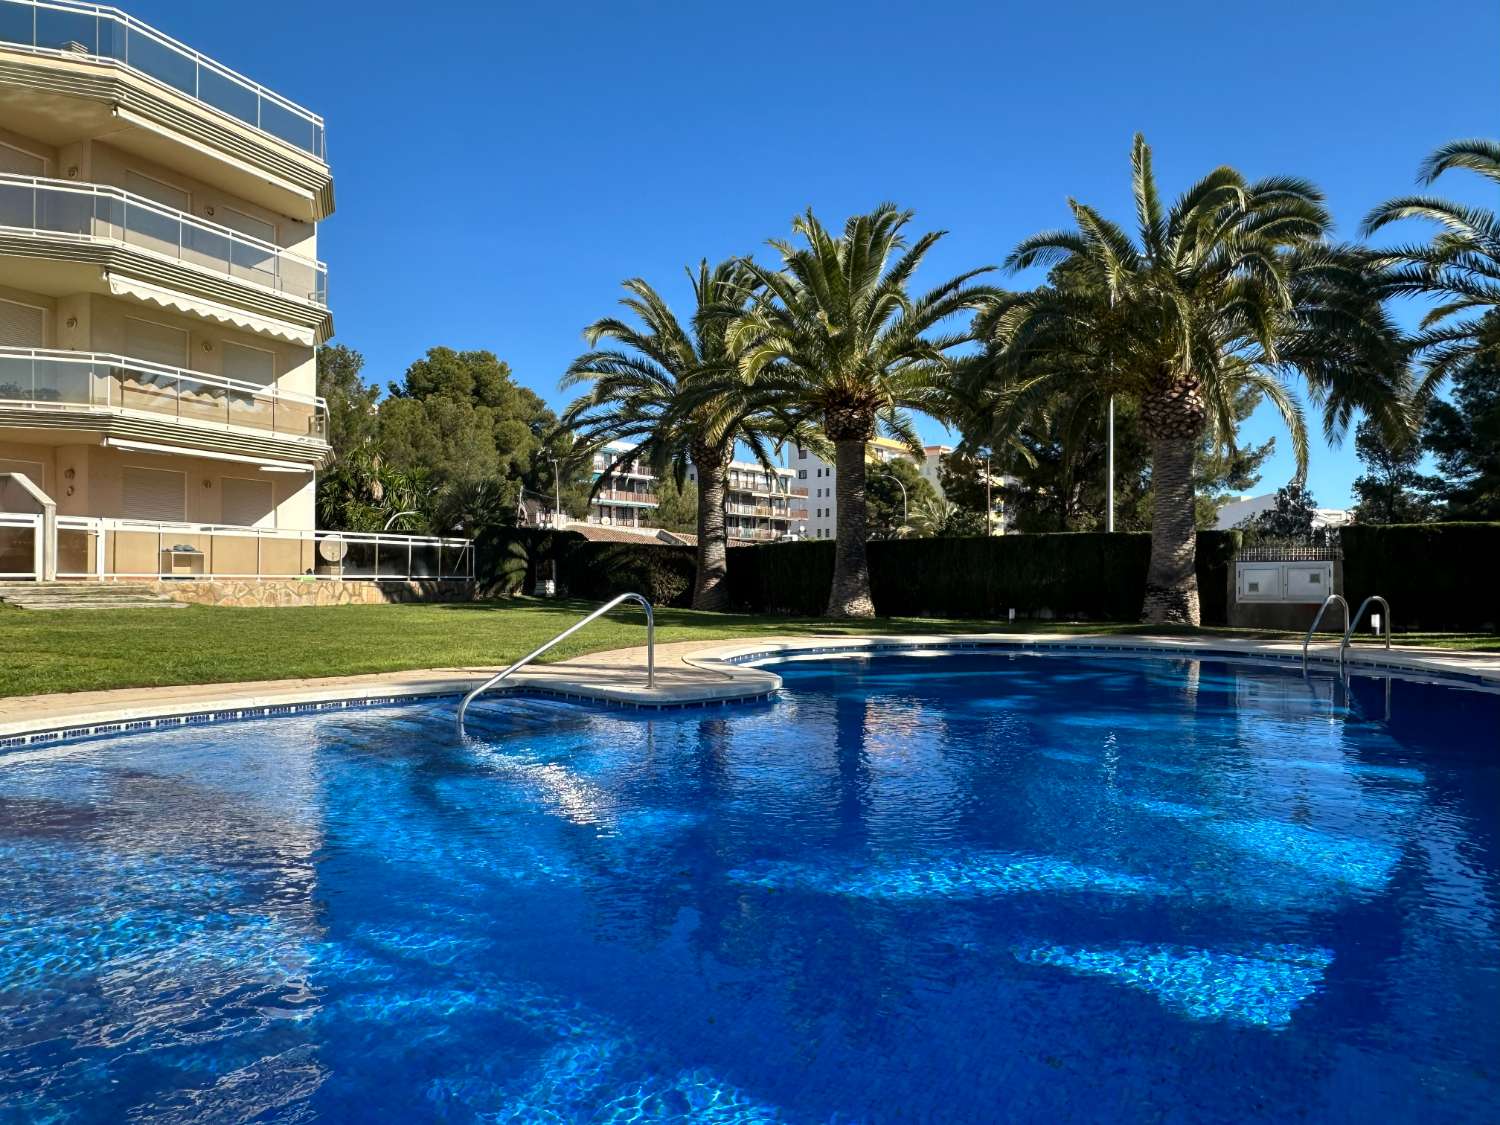 BEAUTIFUL APARTMENT WITH COMMUNAL POOL ON THE SEAFRONT!